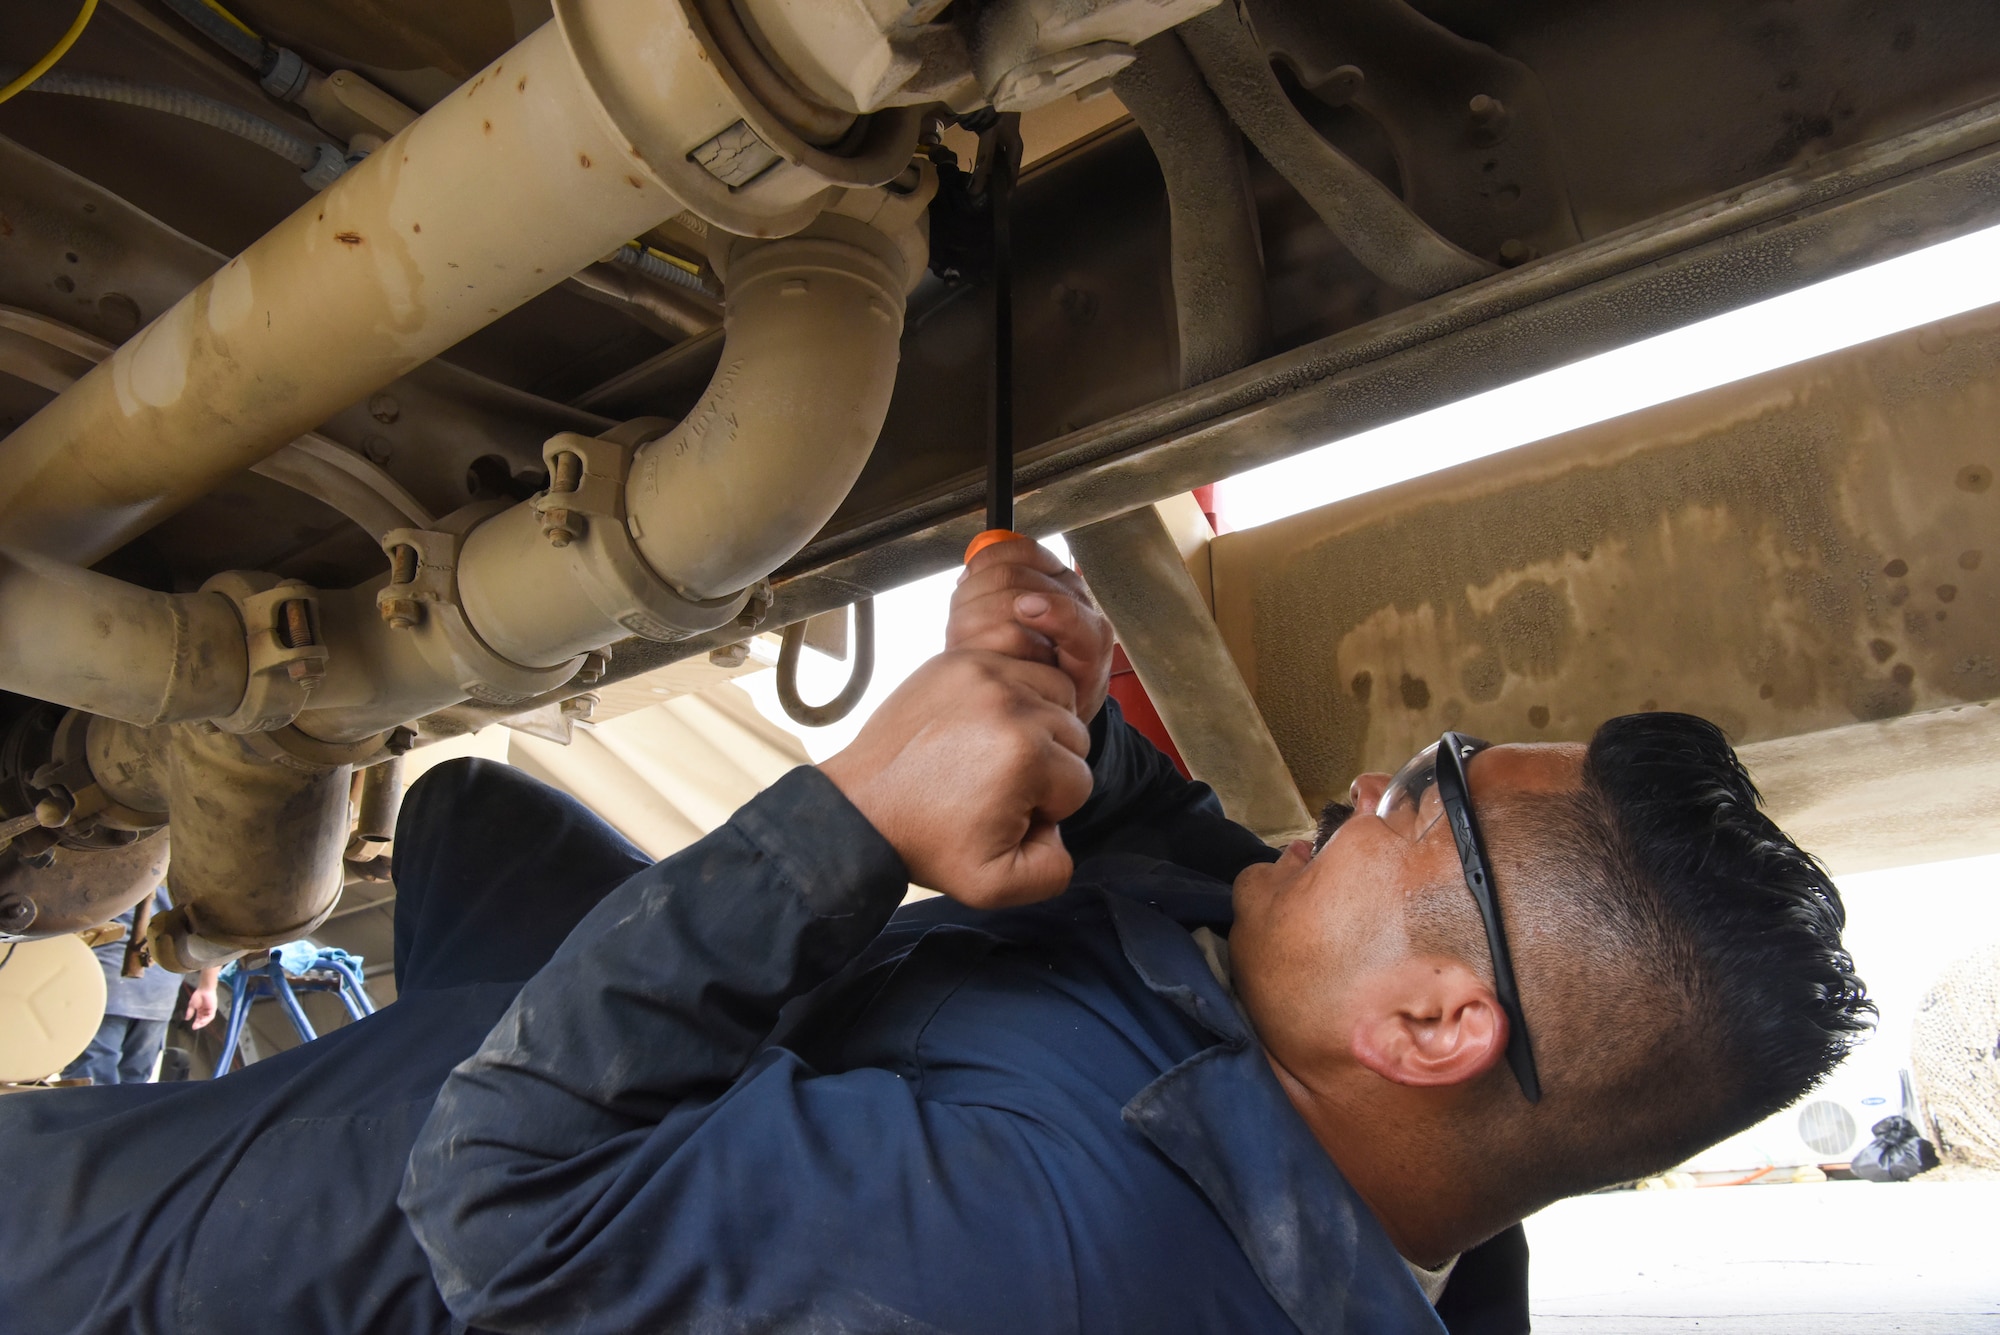 Senior Airman Ismael Garcia, 380th Expeditionary Logistics Readiness Squadron general-purpose mechanic, opens and closes a tank to pump of a refueler truck at Al Dhafra Air Base, United Arab Emirates, Mar. 28, 2019.